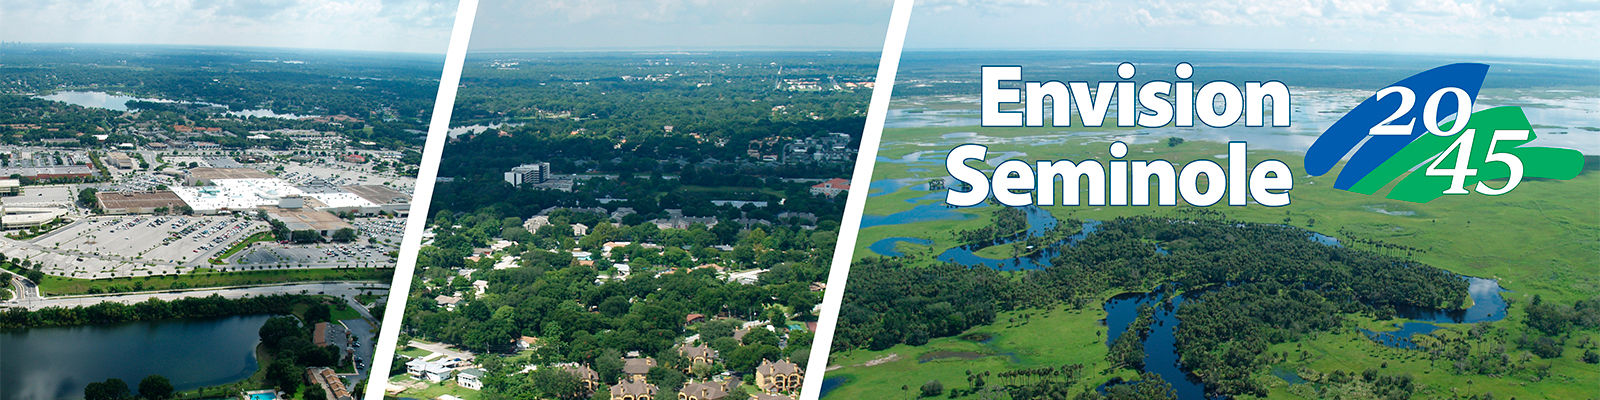 Envision Seminole 2045 header image with aerial photographs of Seminole County